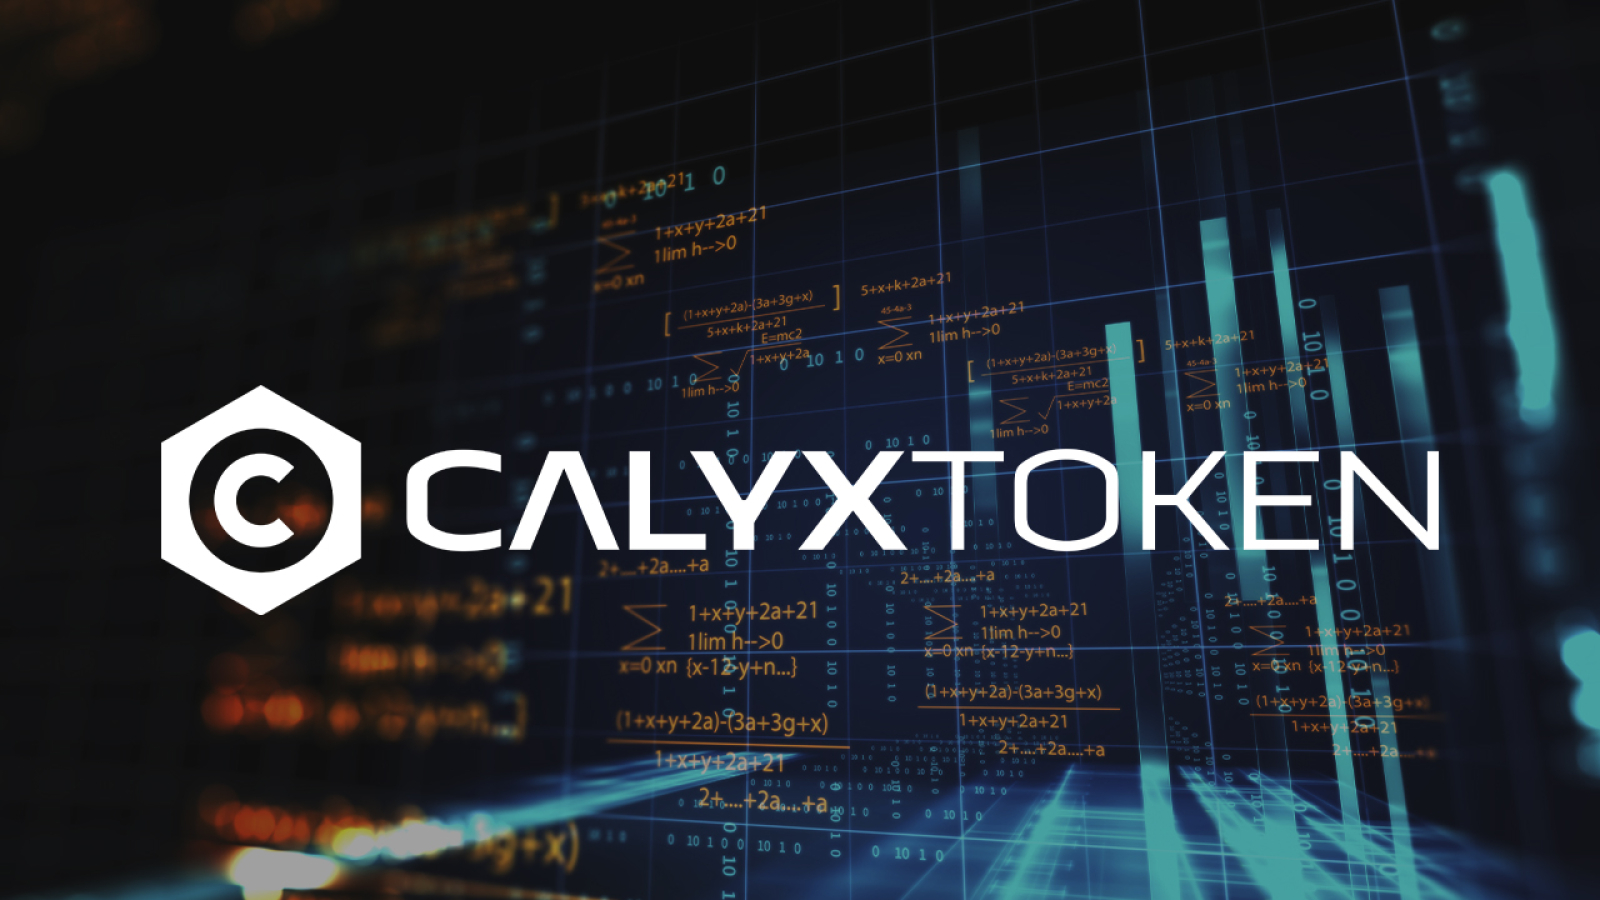 Calyx Token (CLX) Challenges Heavyweight Altcoins Chainlink (LINK), Cosmos